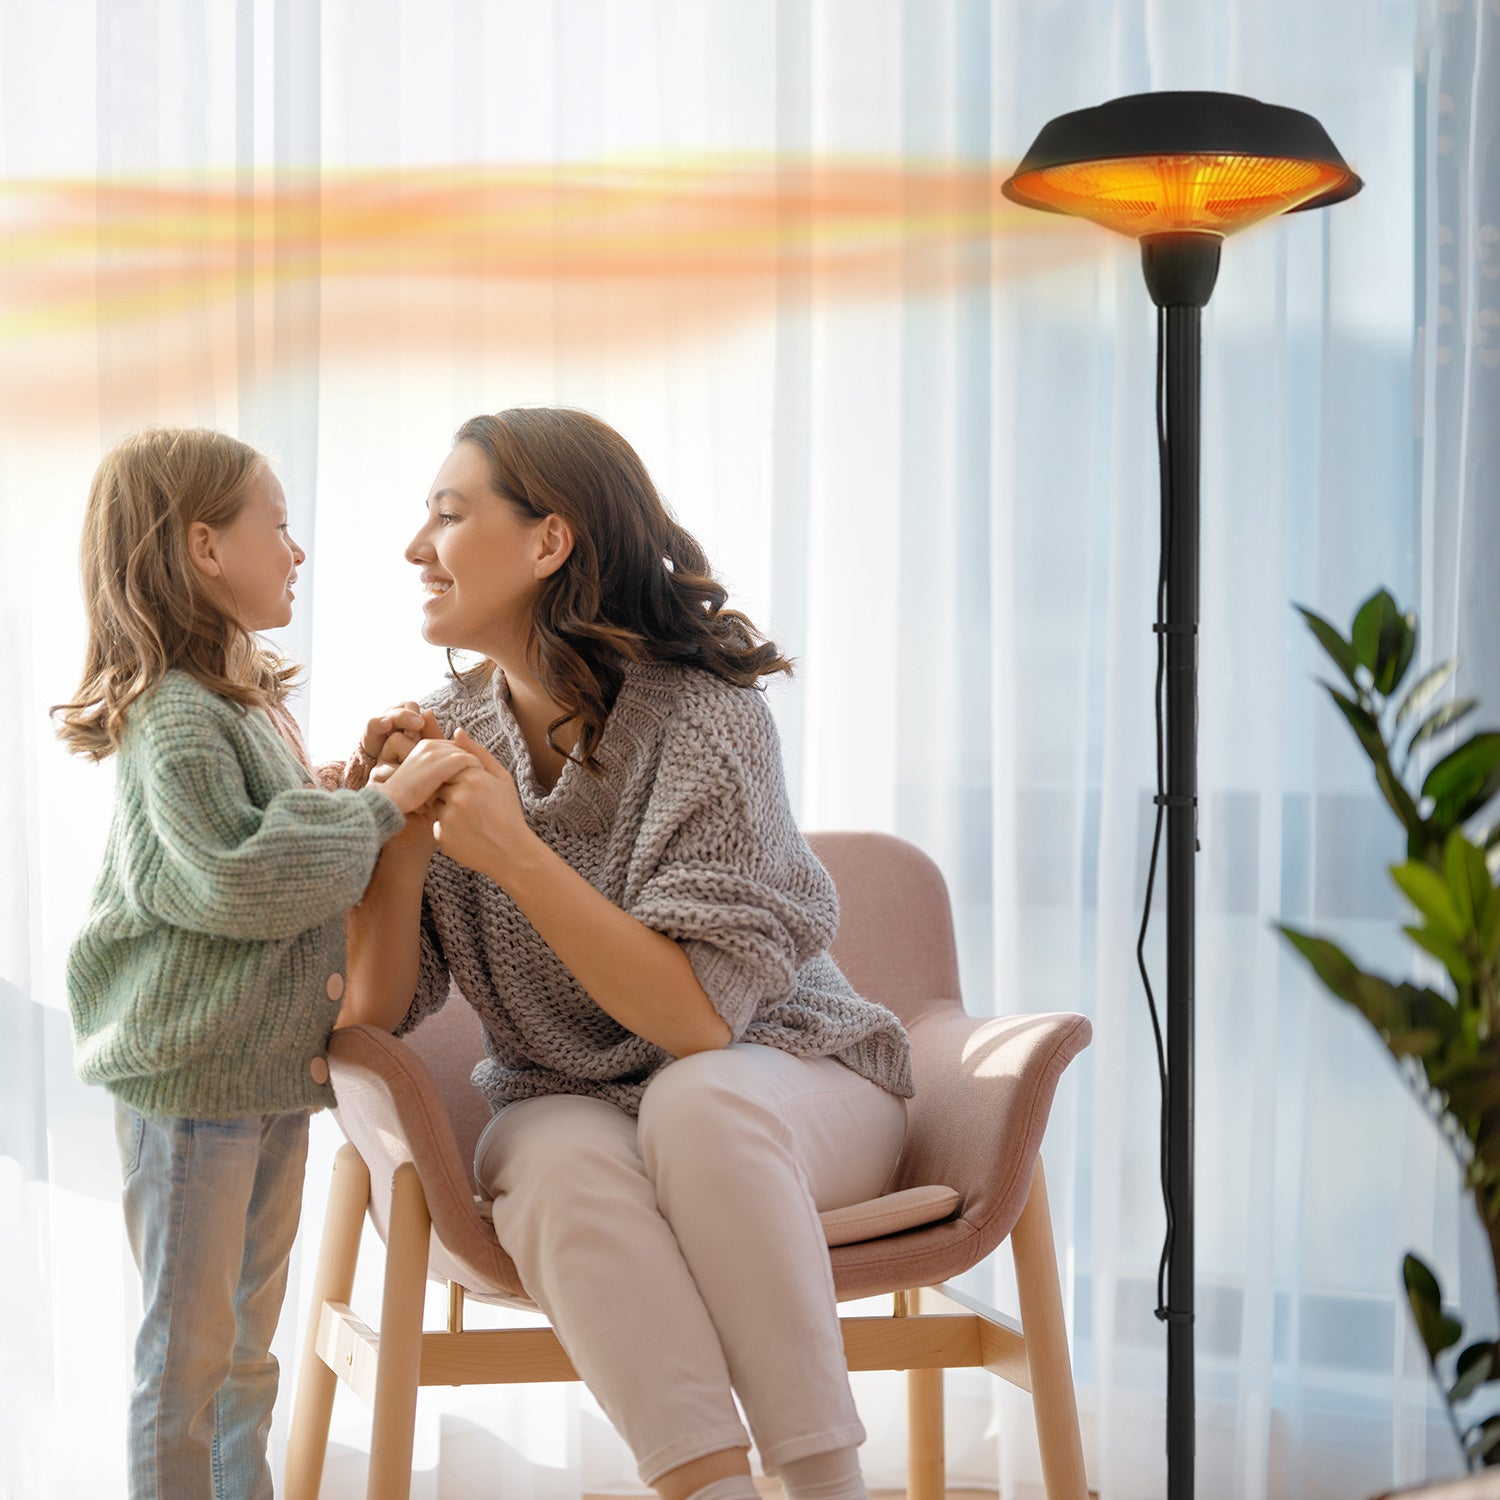 Mother with her daughter sitting on chair beside an electric heater